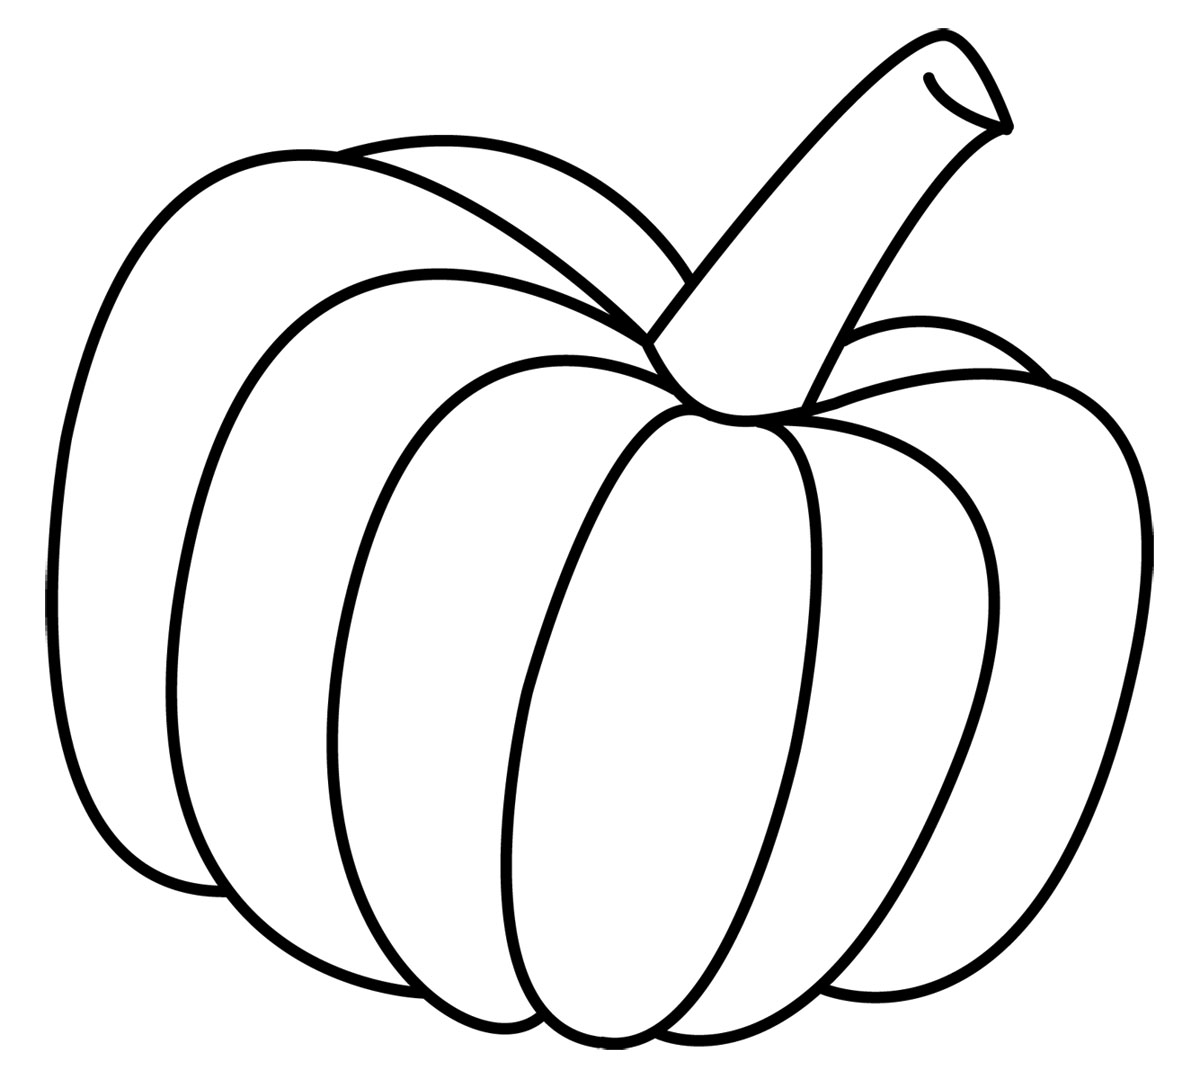 fall pumpkins coloring pages to print